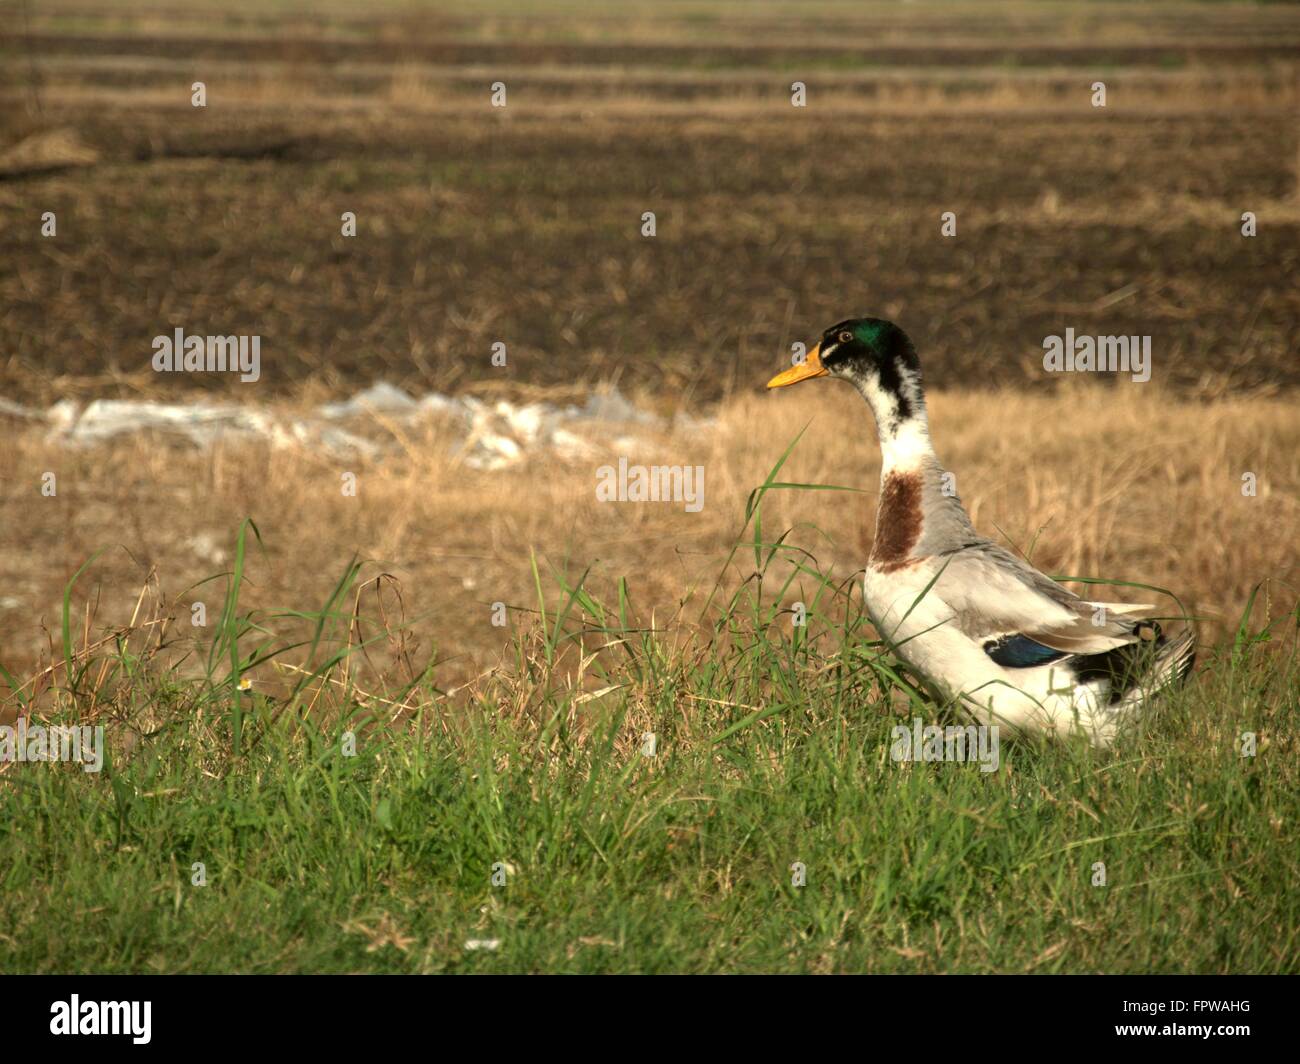 A white duck is wandering in the field in the village Stock Photo